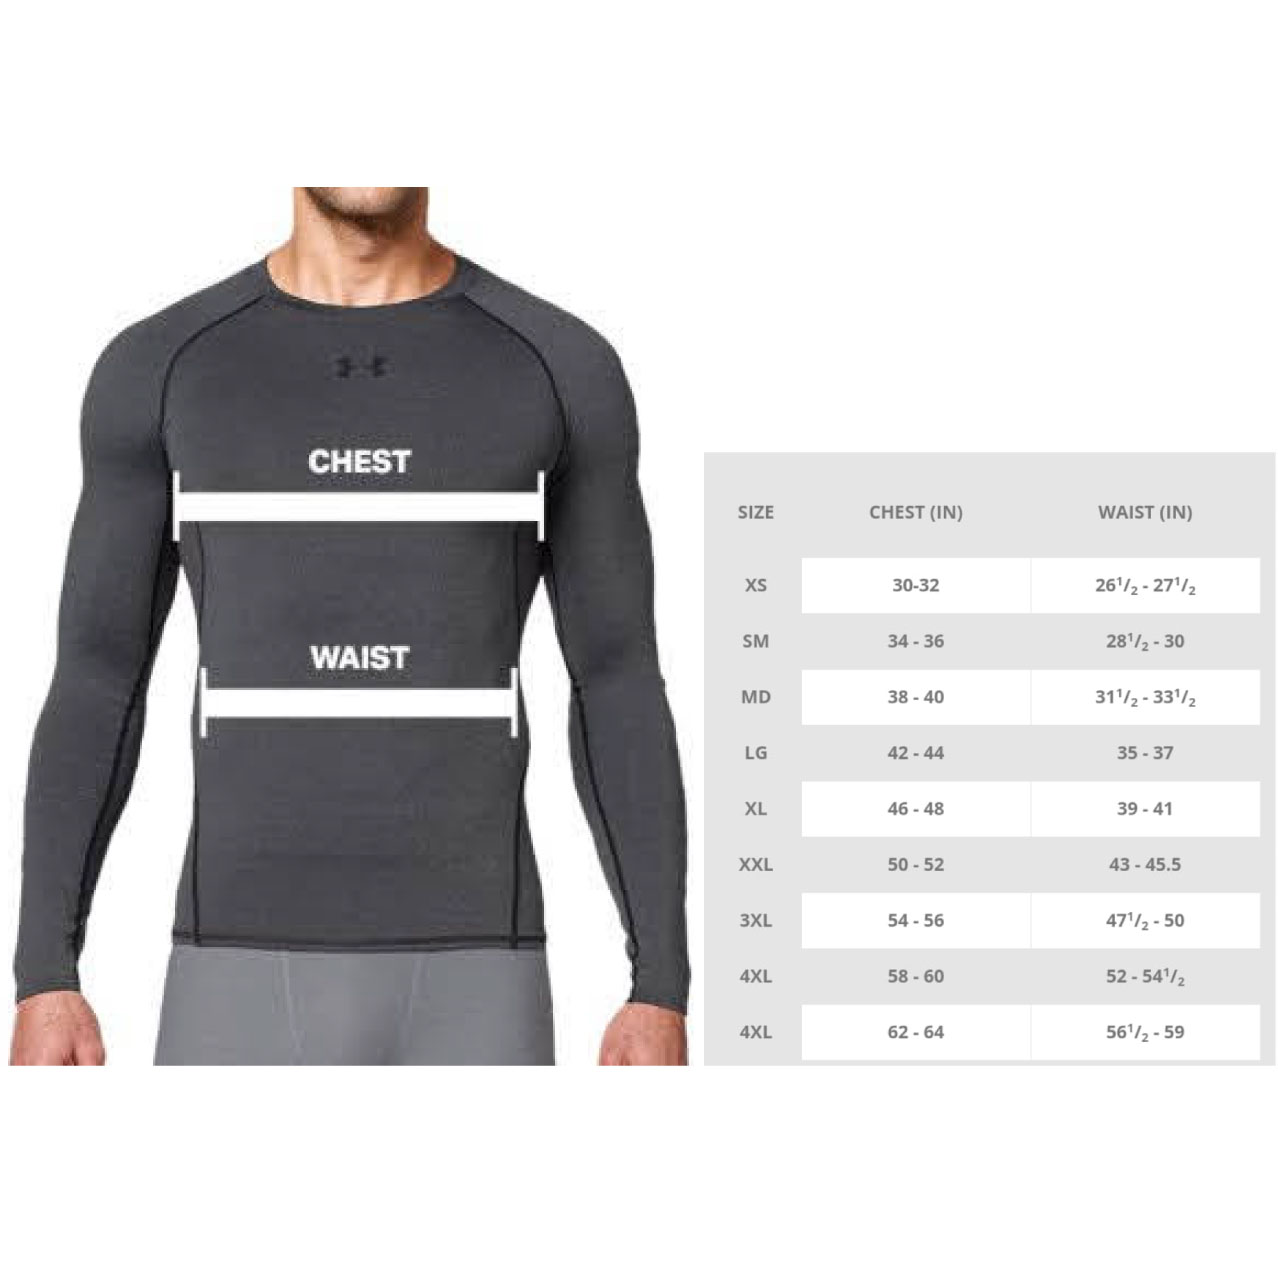 Underarmour Size Chart